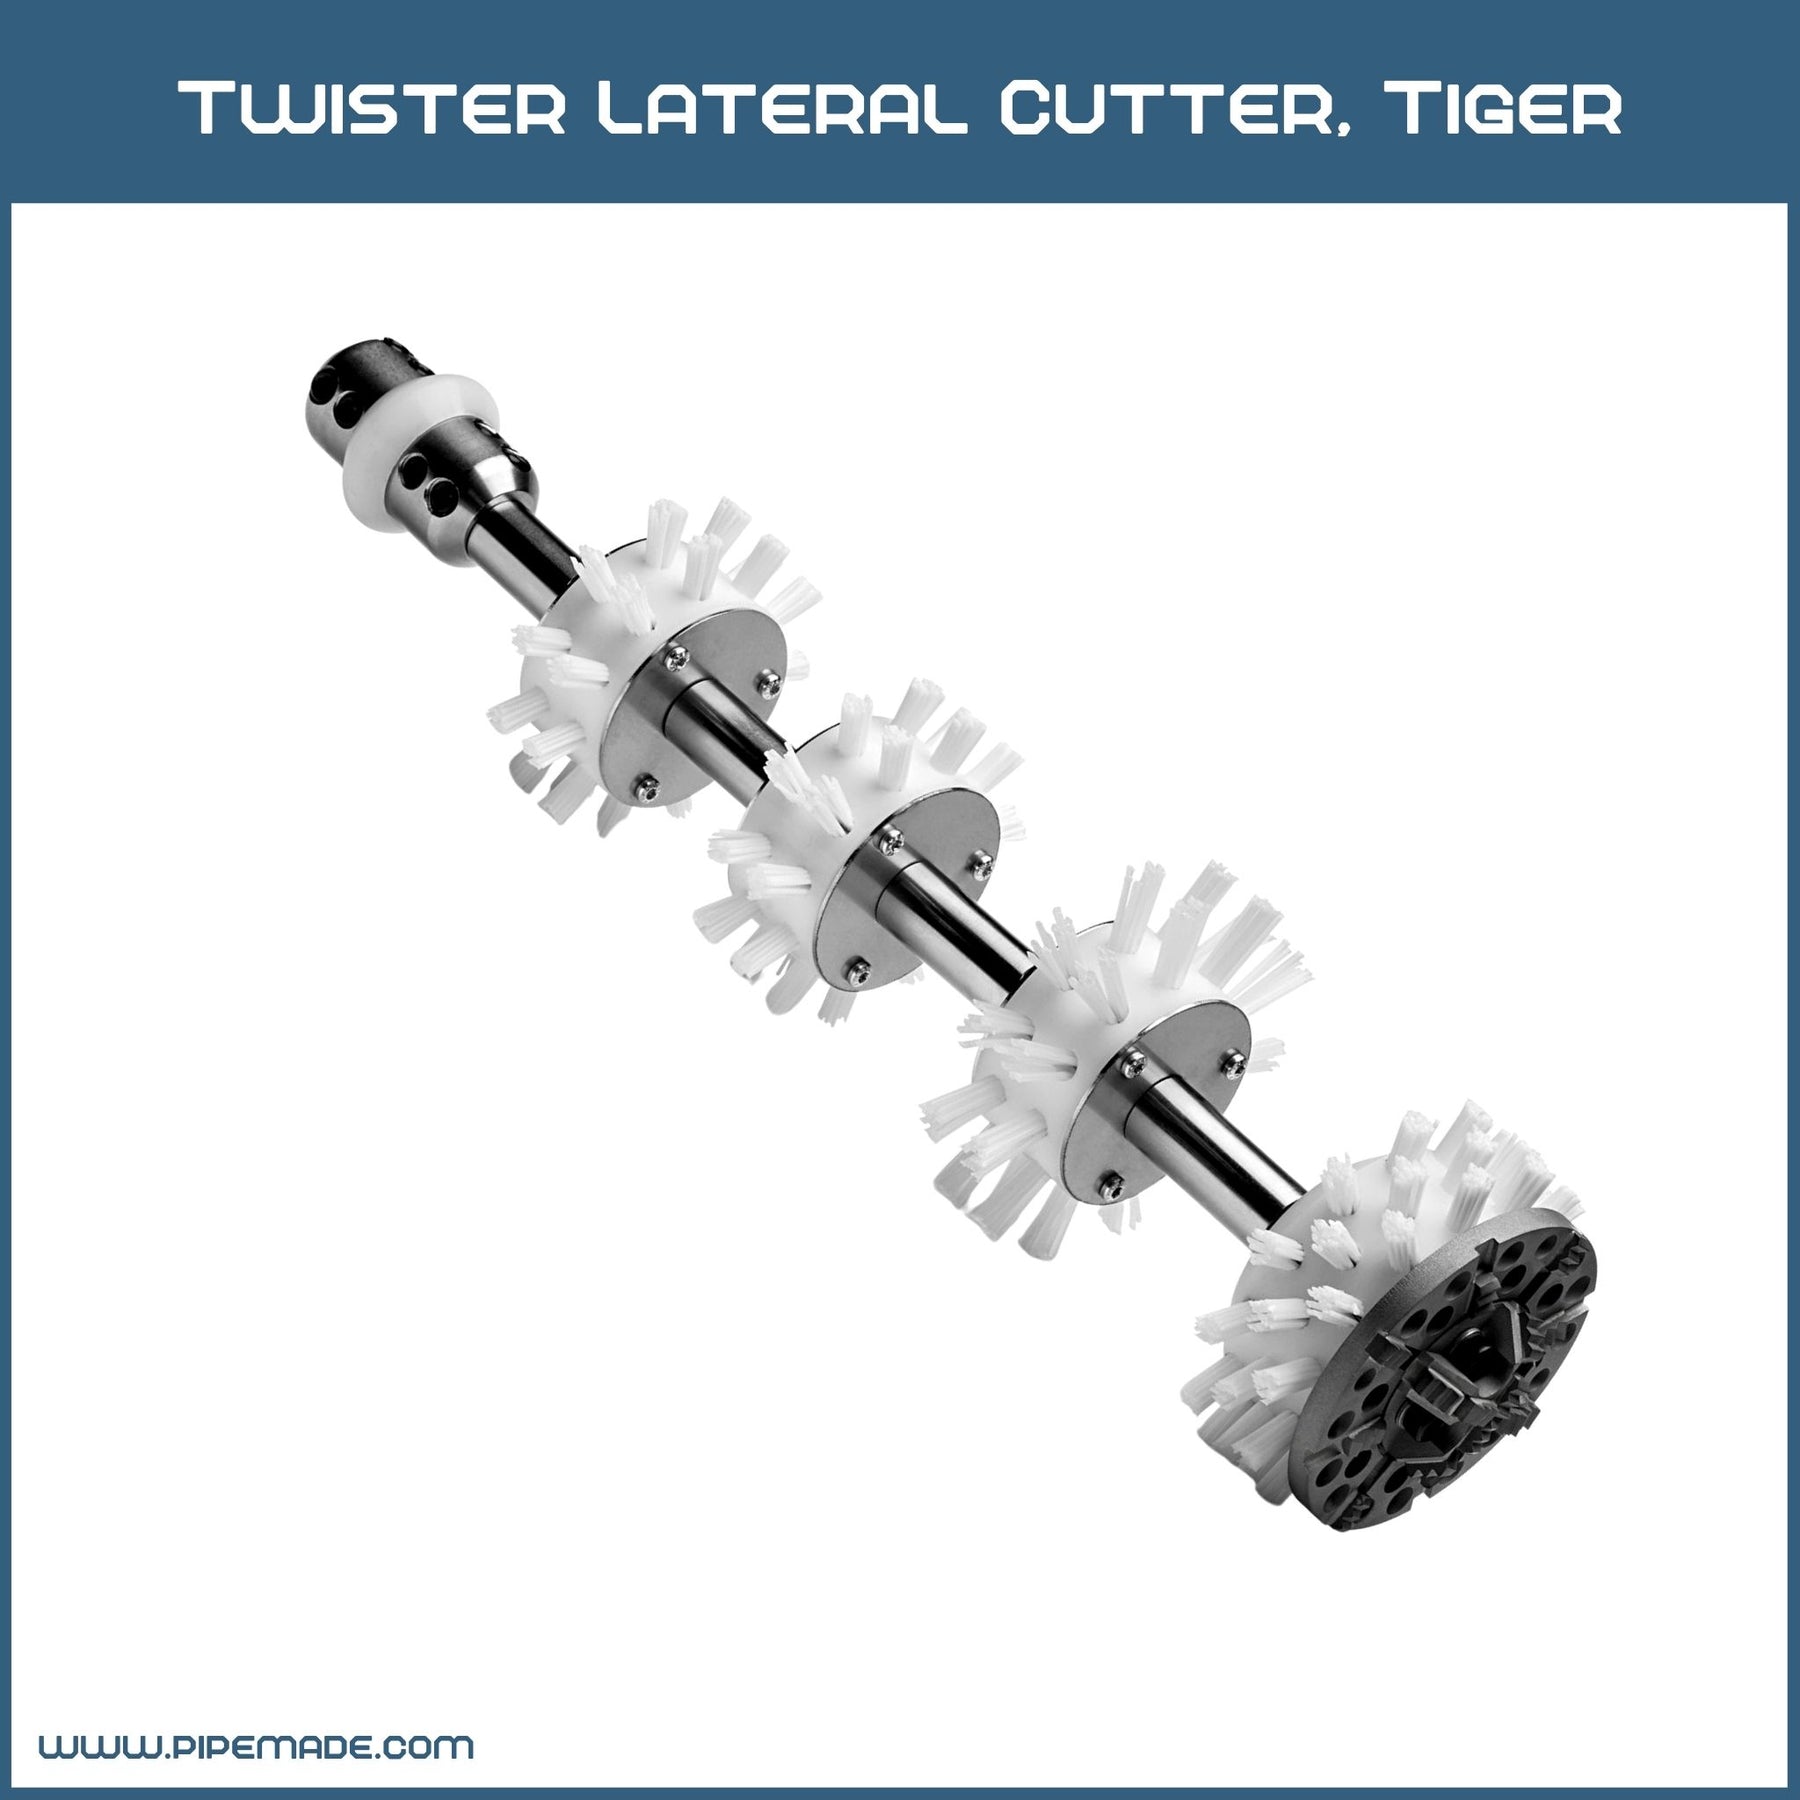 Twister Lateral Cutter, Tiger | Twister Lateral Cutters | Picote Solutions | picote-twister-lateral-cutter-tiger